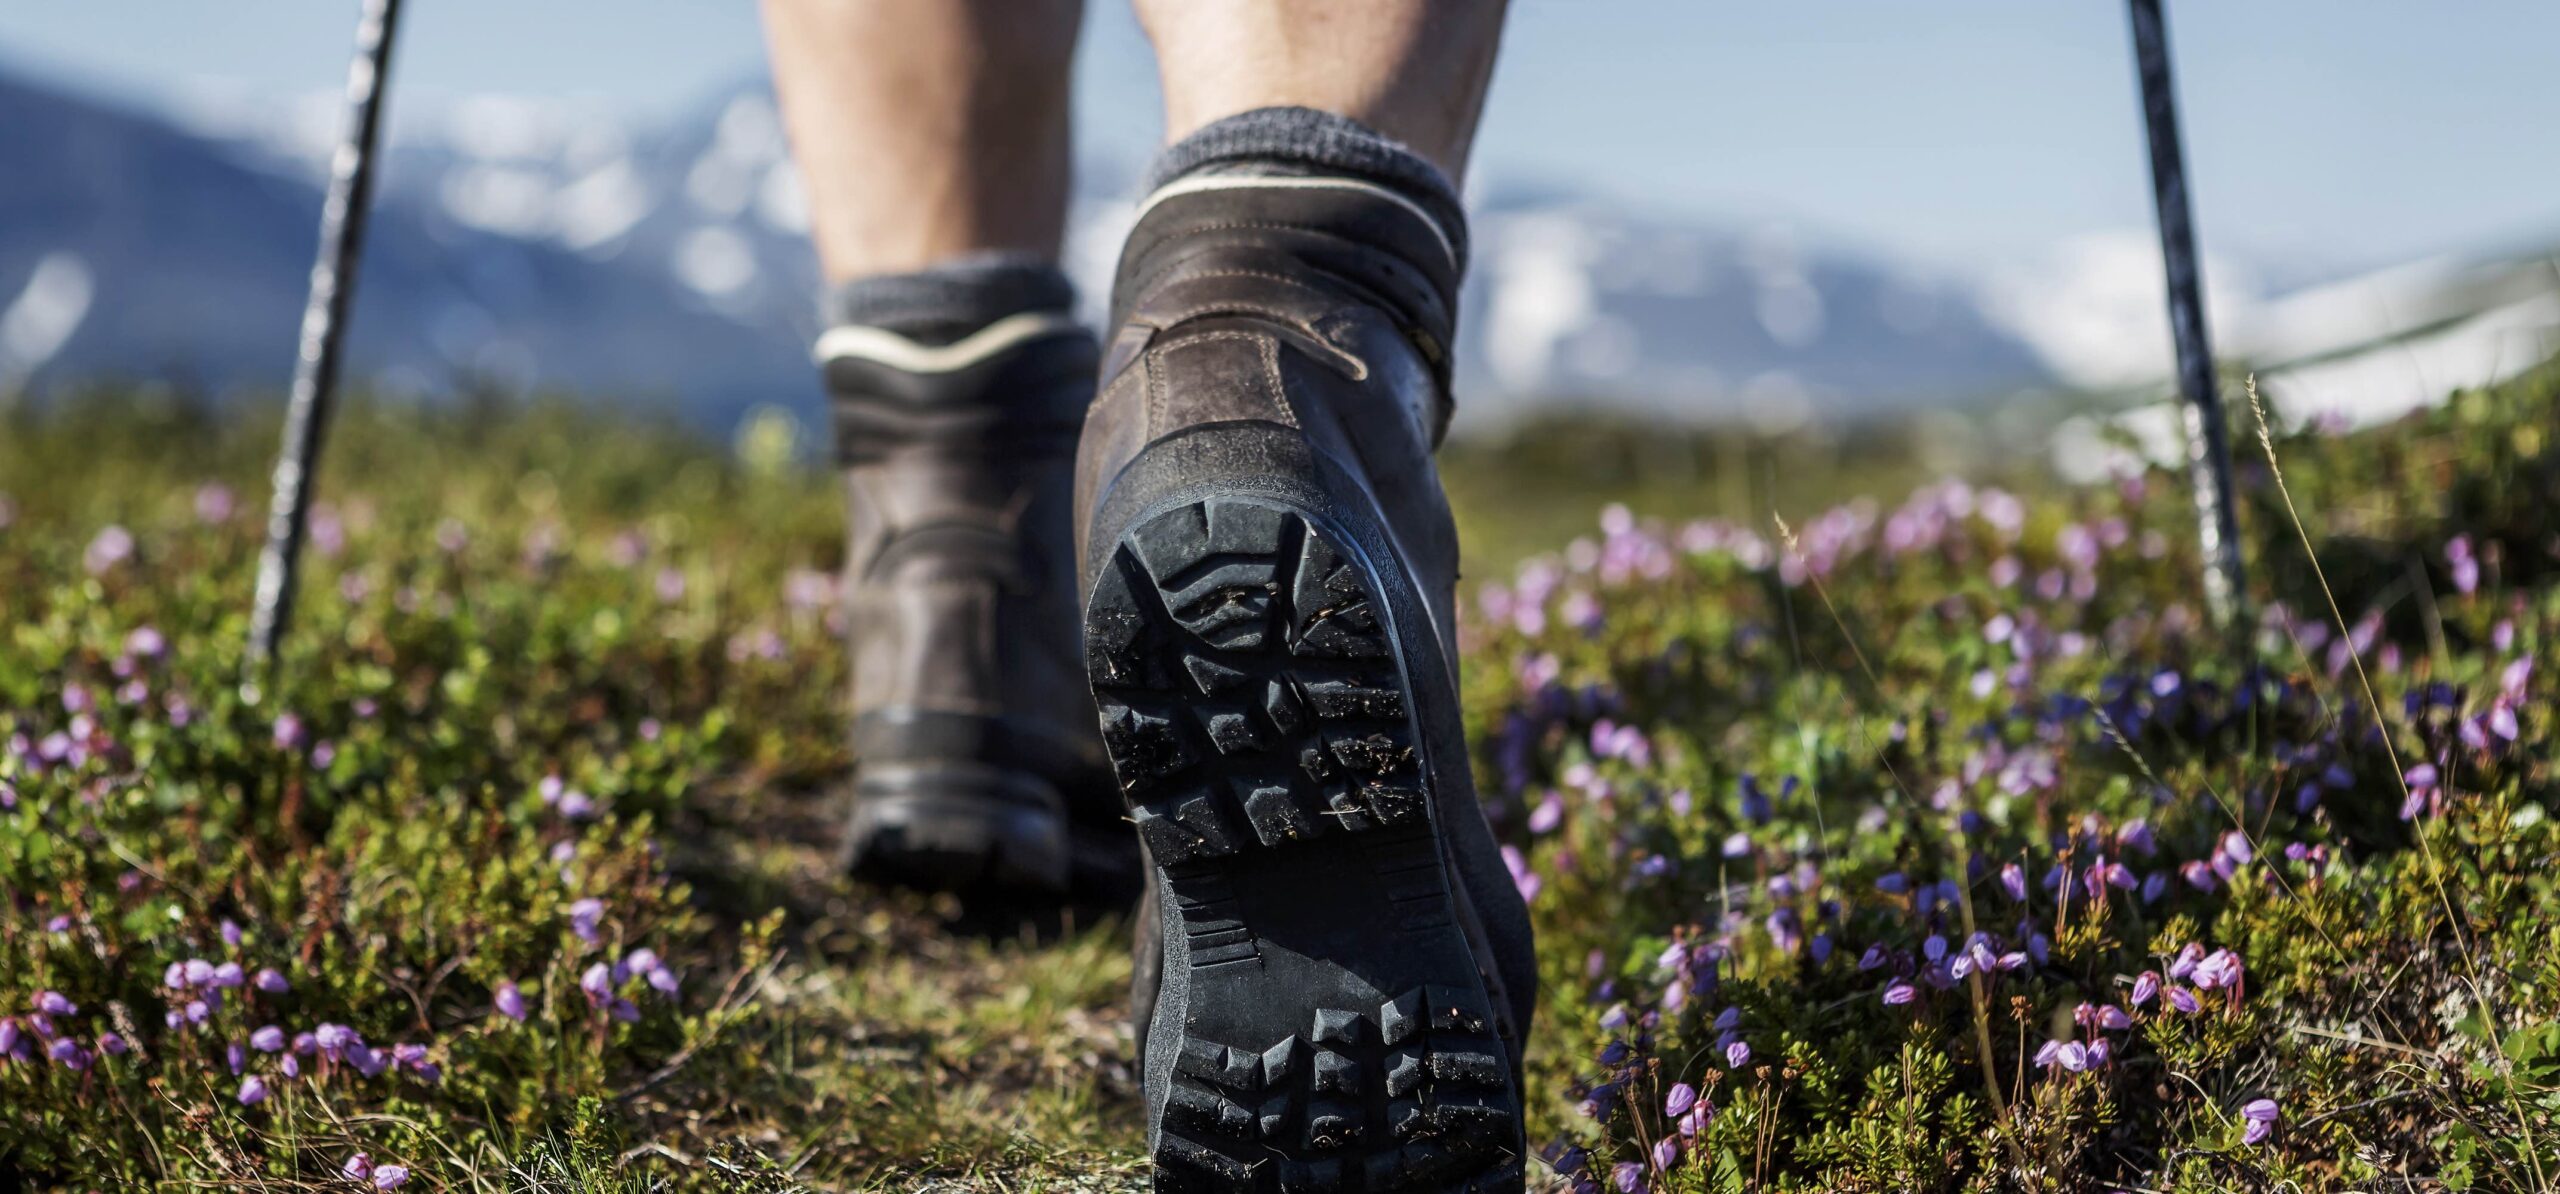 This captivating image showcases a pair of up-close hiking boots treading a grassy trail, with small purple flowers guiding the way toward the majestic snow-capped mountains.